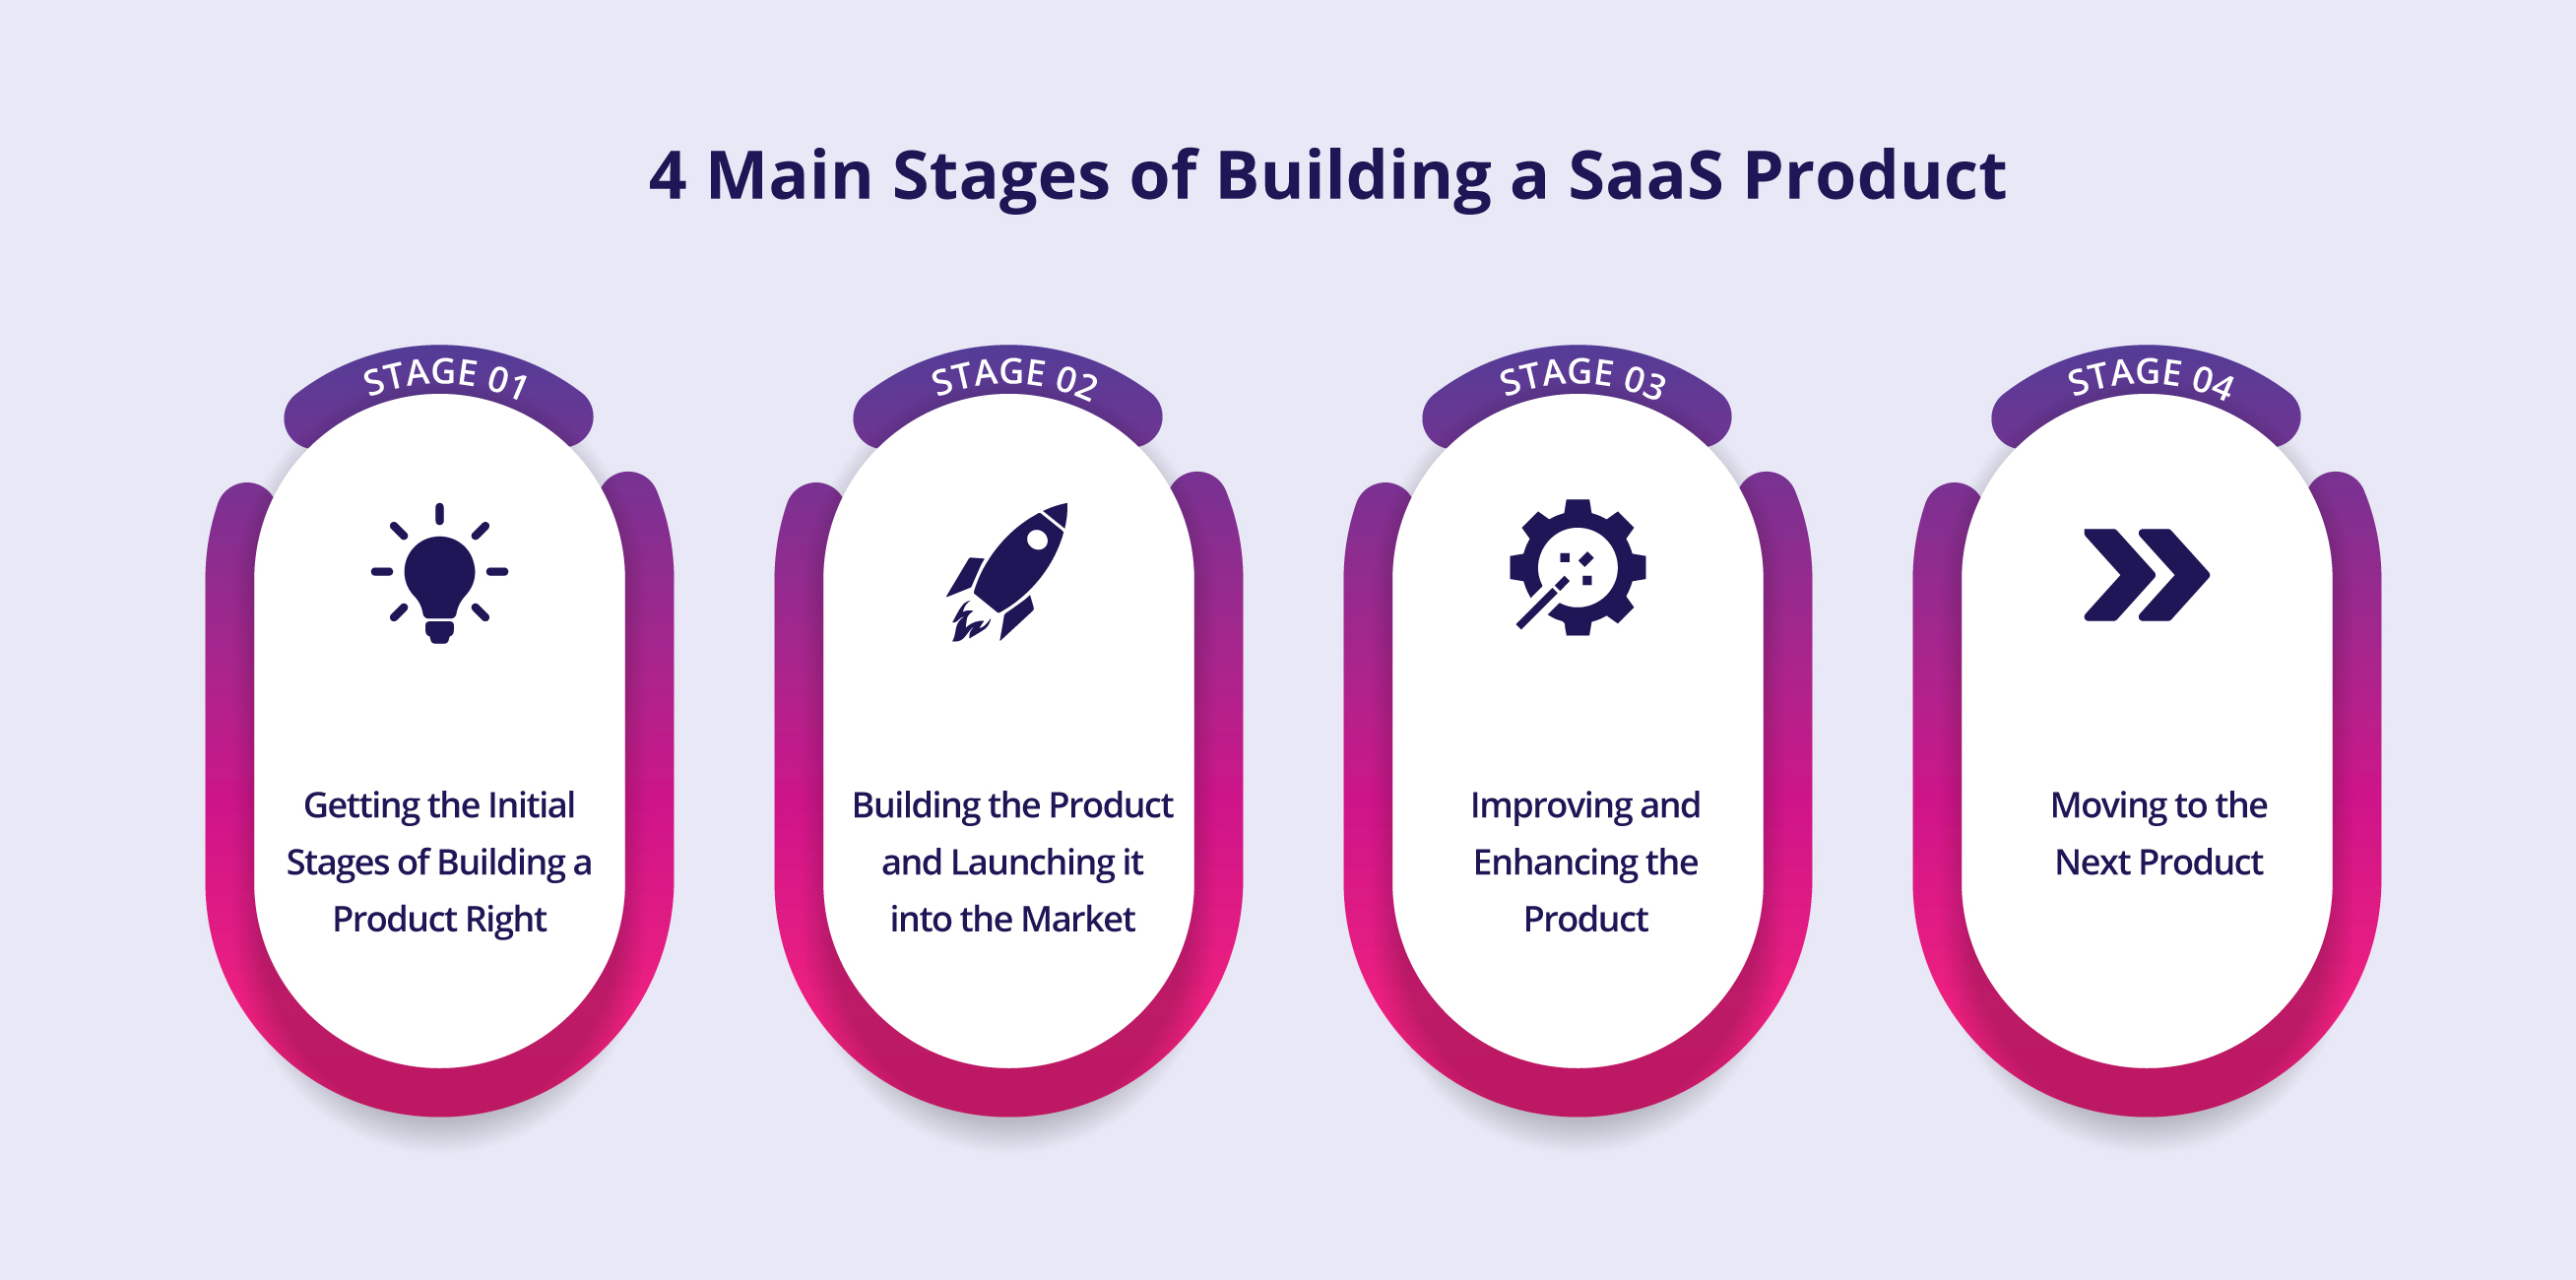 Stages of Building a SaaS Product